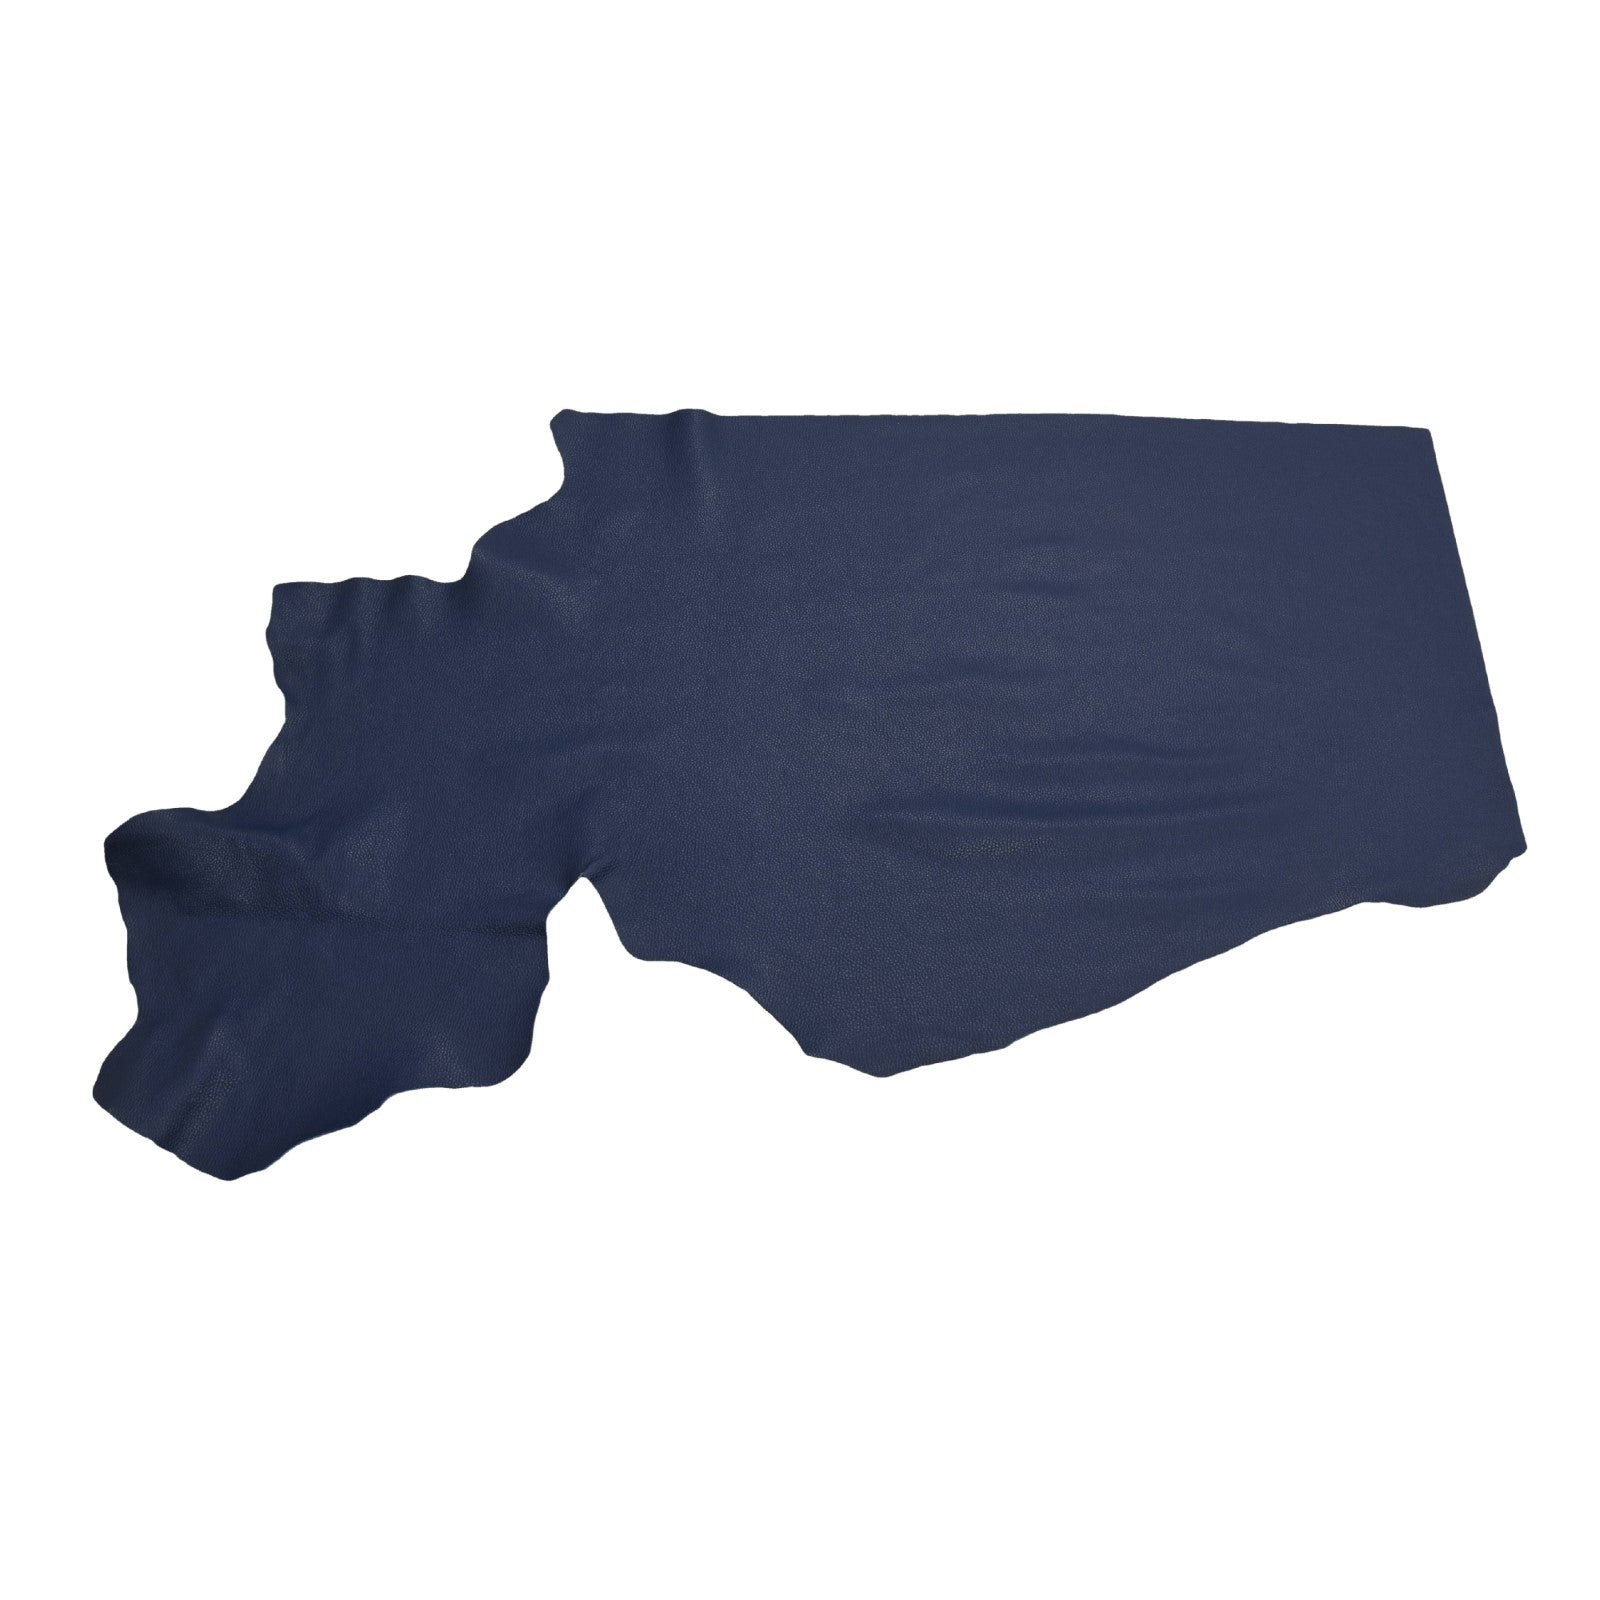 Naval Base Blue Tried n True 3-4 oz Leather Cow Hides, 6.5-7.5 Square Foot / Project Piece (Bottom) | The Leather Guy